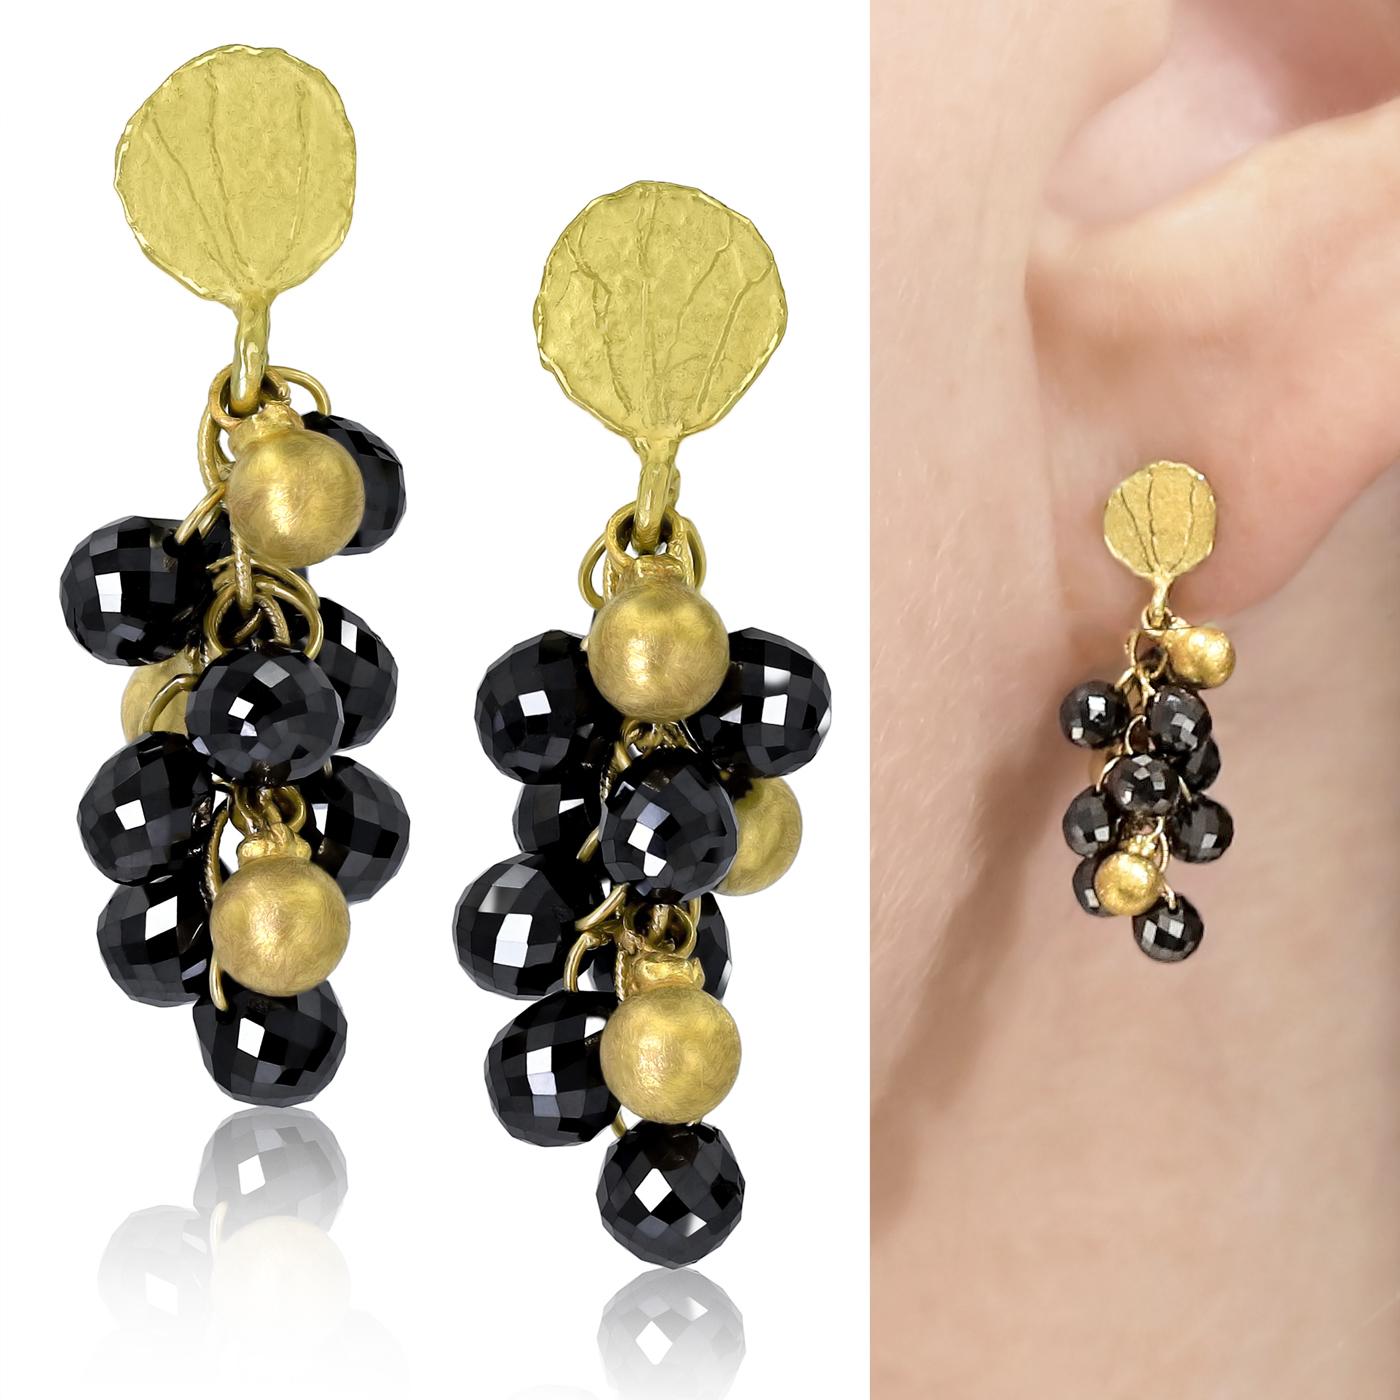 Petal Top Navette Drop Earrings hand-fabricated by award winning jewelry maker Barbara Heinrich featuring 5.30 carats of shimmering faceted black diamond briolettes accented with signature-finished solid 18k yellow gold smooth drops and finished